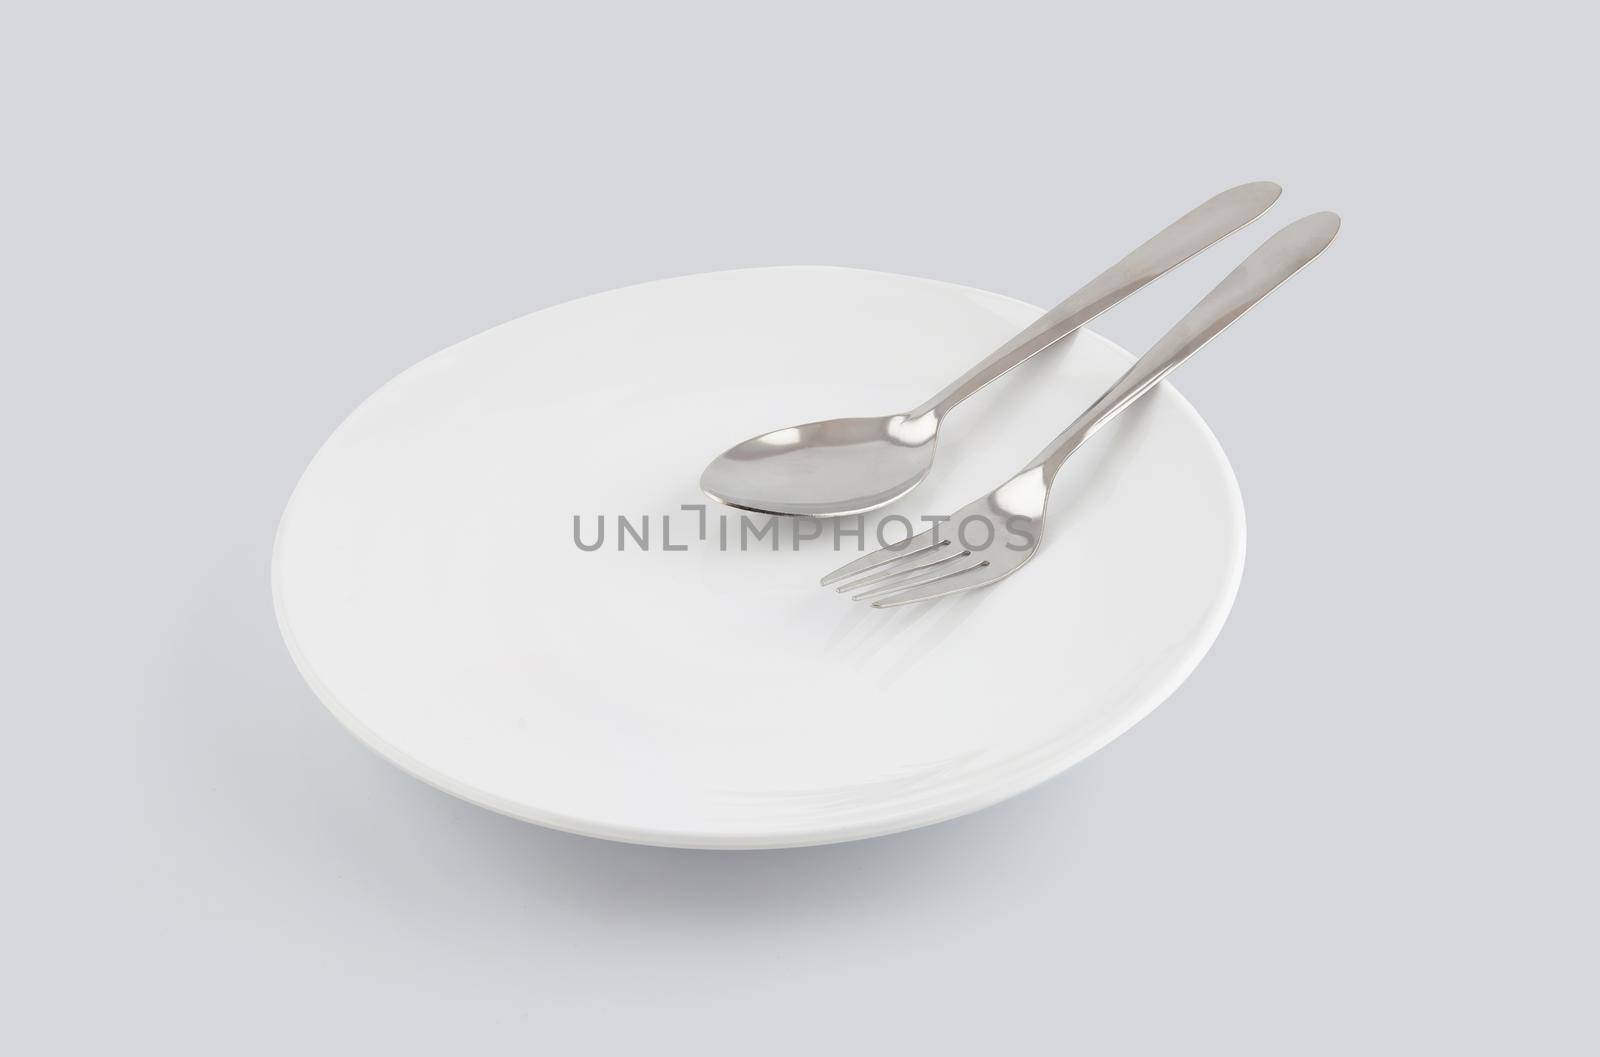 Dish spoon and fork isolated on white background, utensil for food, ceramic plate with empty, kitchenware or dishware with stainless in studio, object concept.